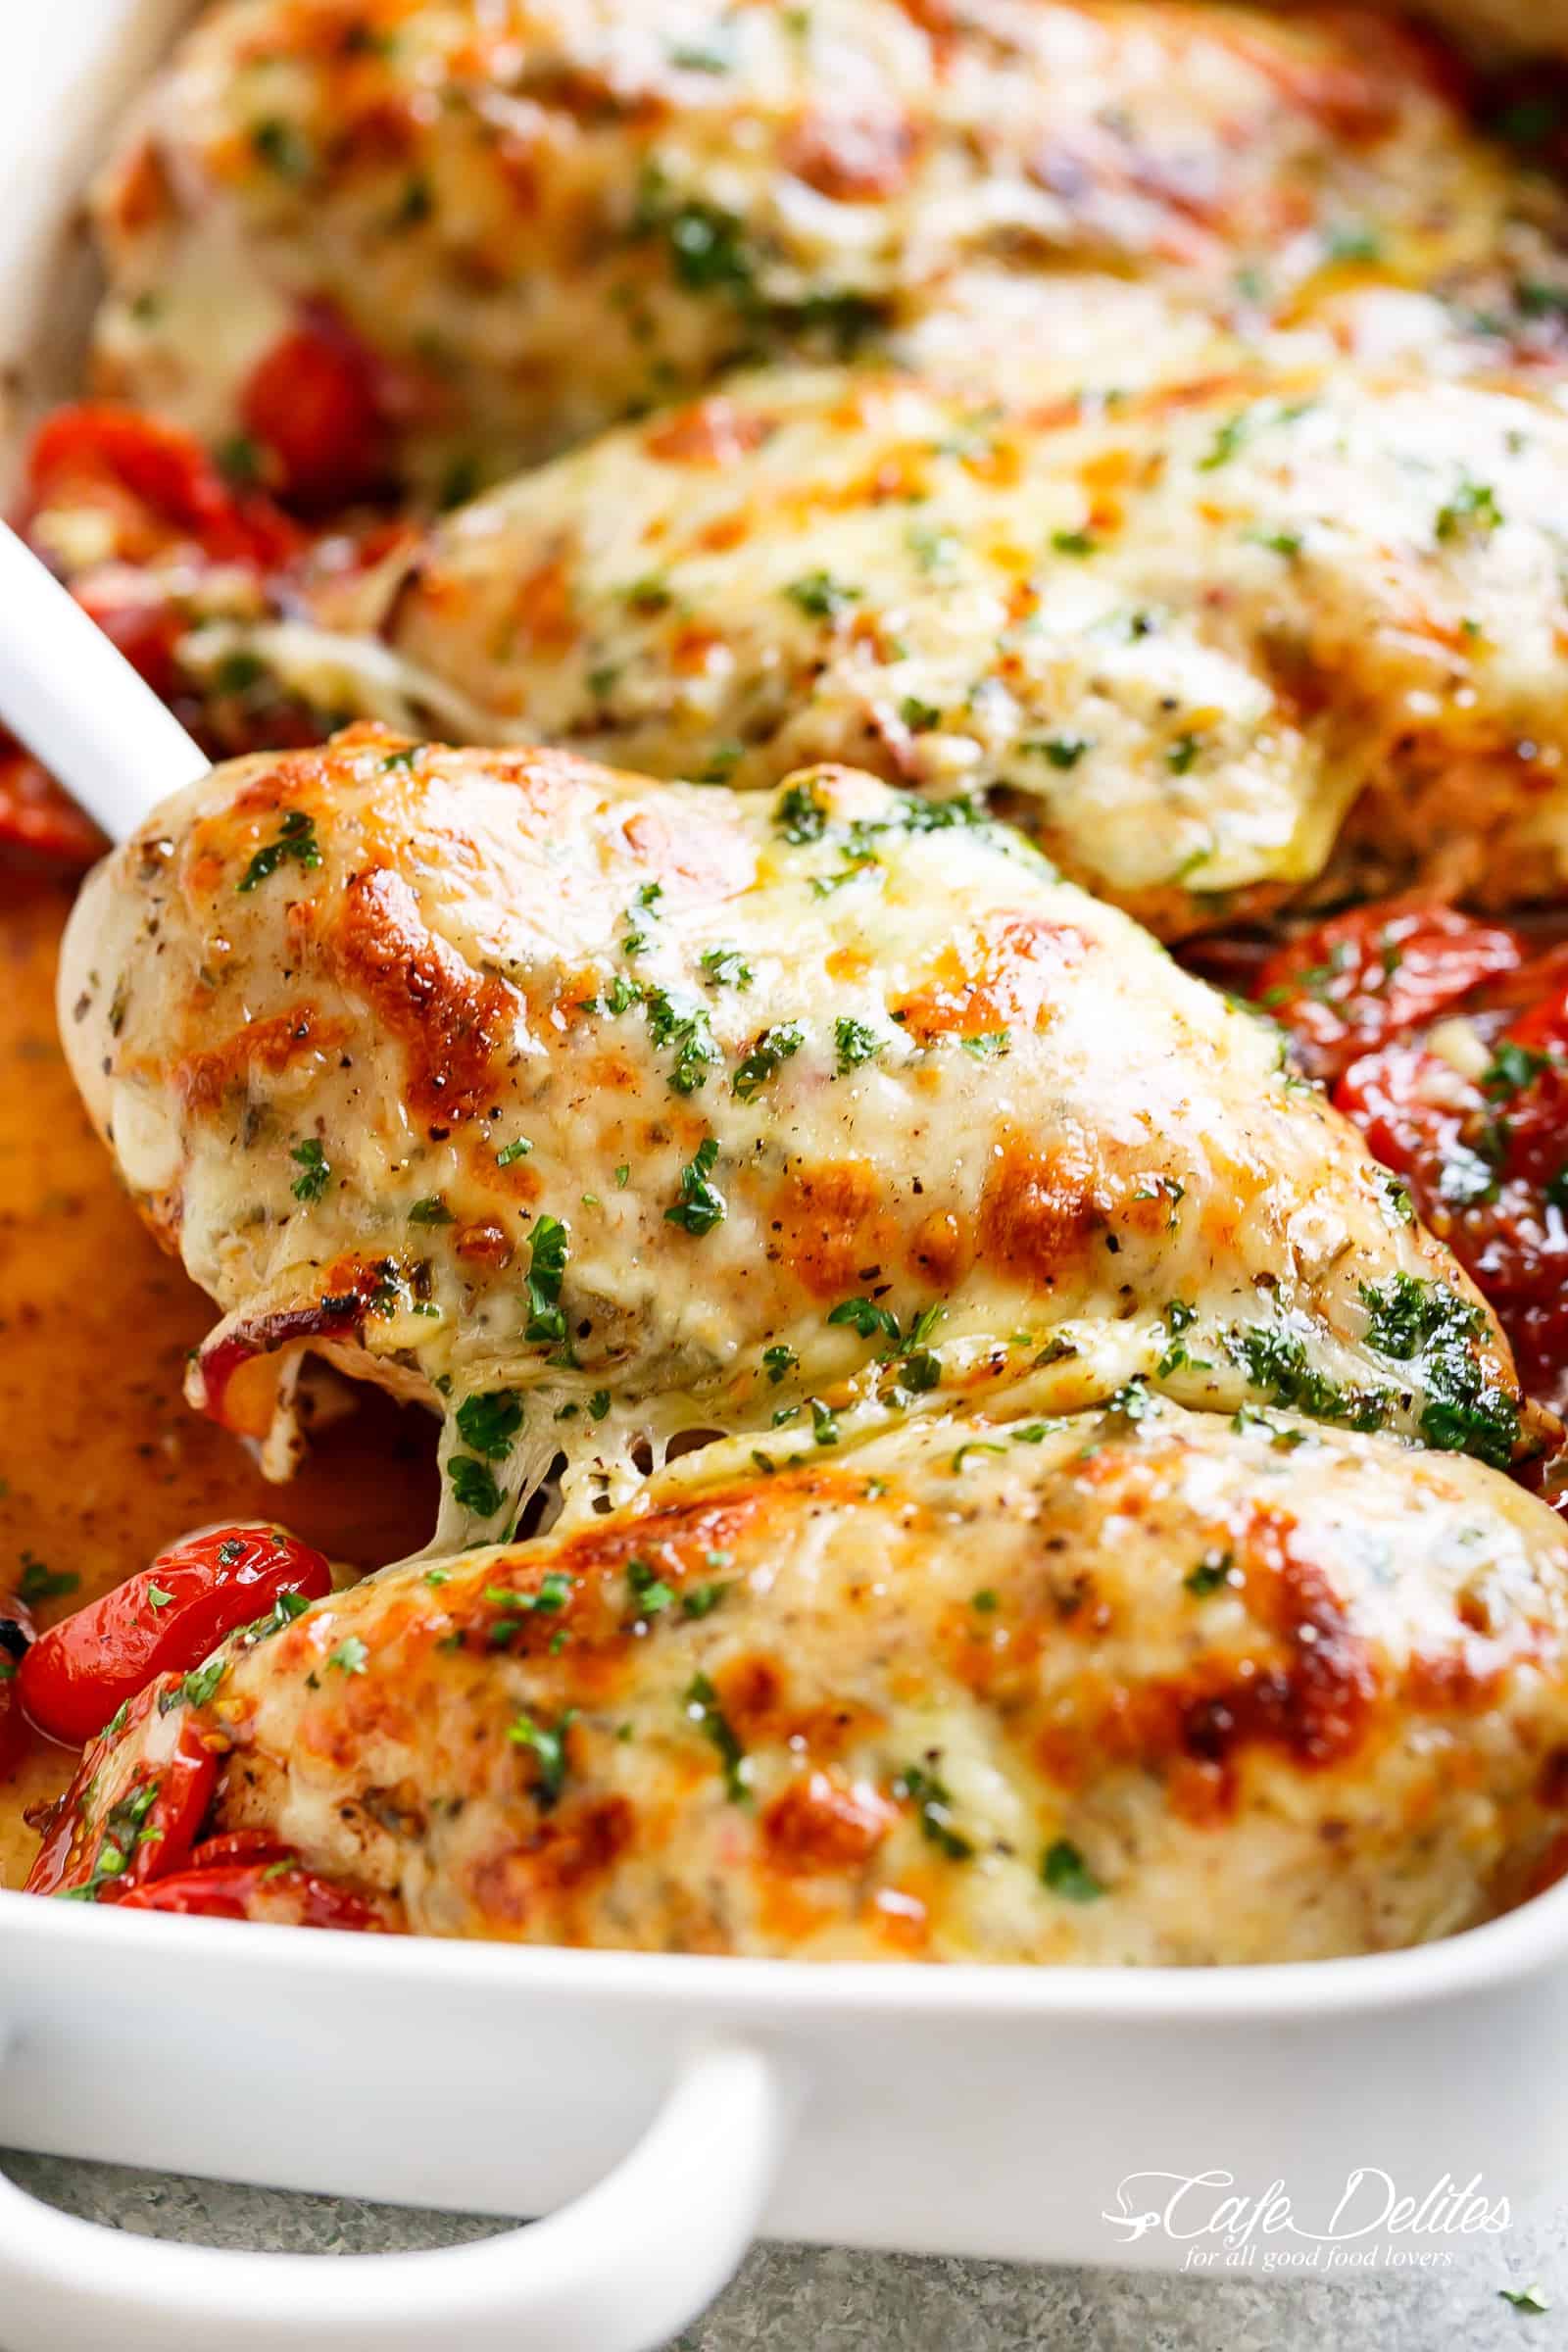 15 Easy Baked Boneless Skinless Chicken Breast Recipes How To Make Perfect Recipes